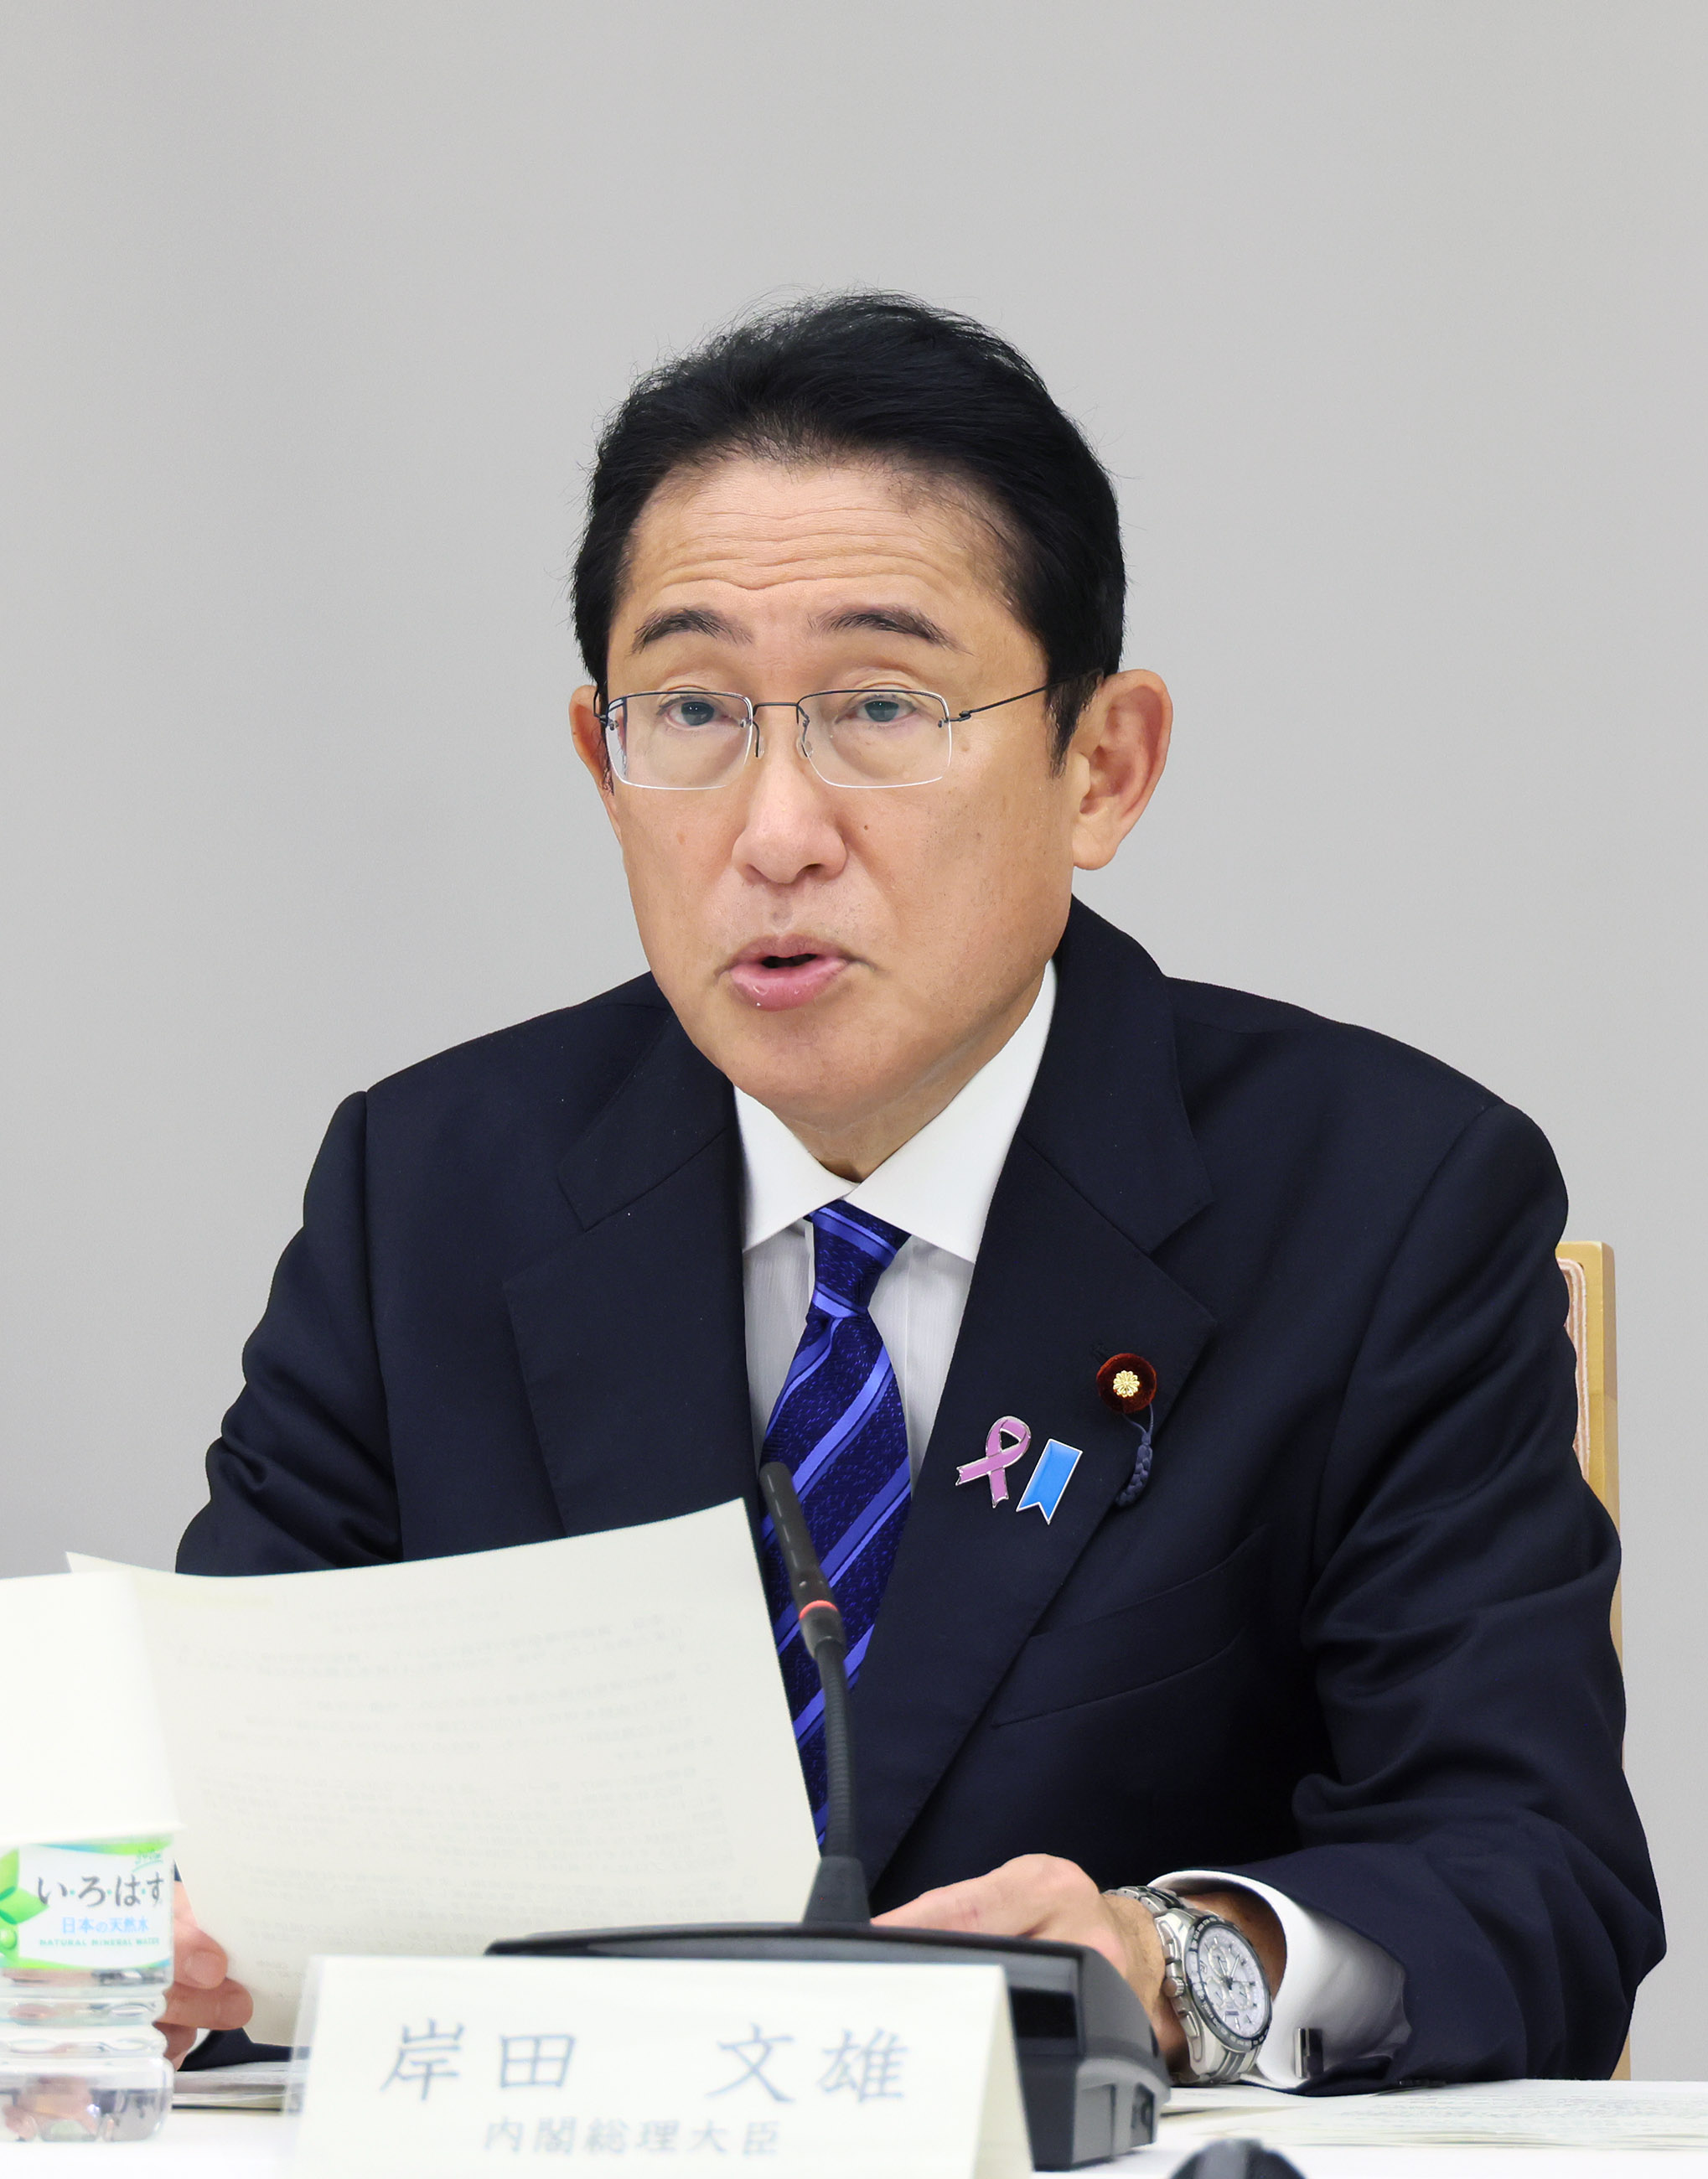 Prime Minister Kishida wrapping up a meeting (5)